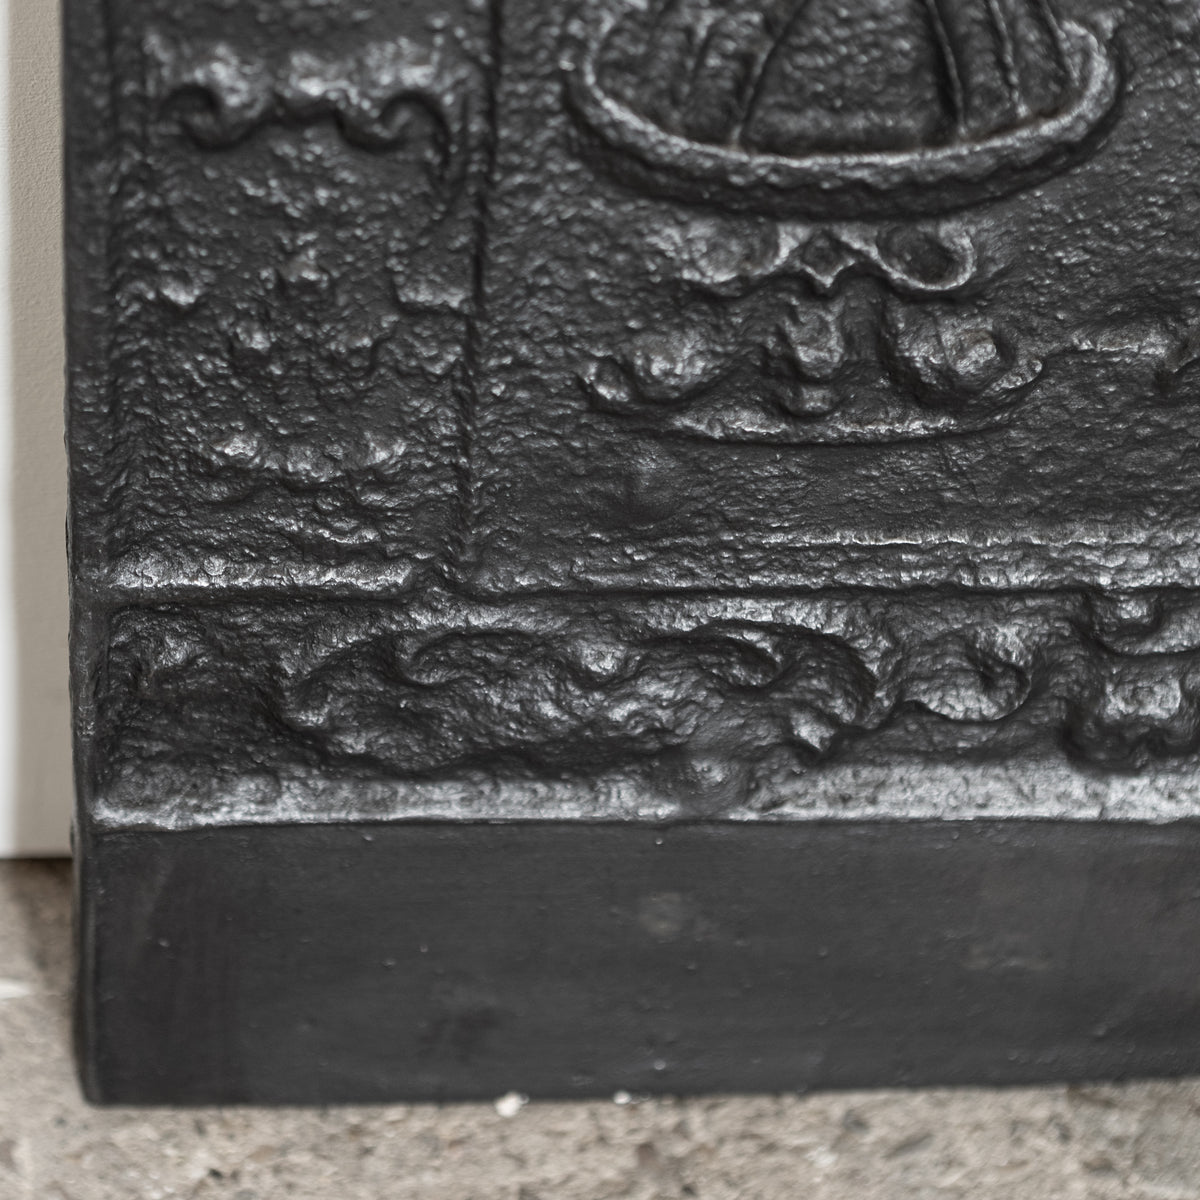 Antique Cast Iron Fireback with Classical Spring Scene | The Architectural Forum